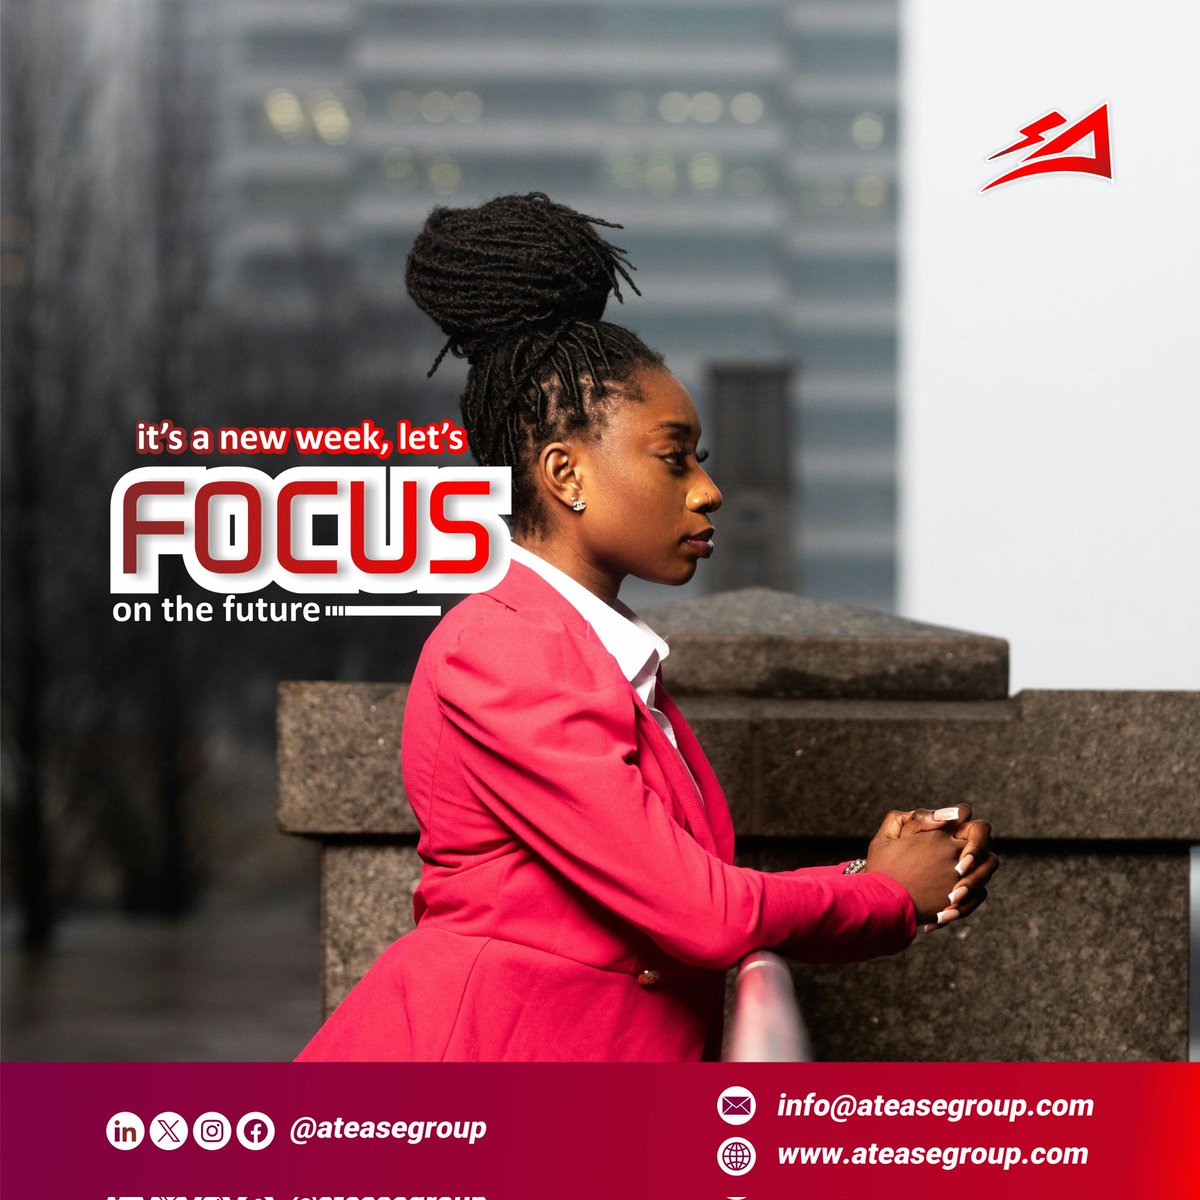 It's a New Week, let's focus on the future👍

#ateasegroup 
#atease
#newweeknewgoals 
#focus
#future